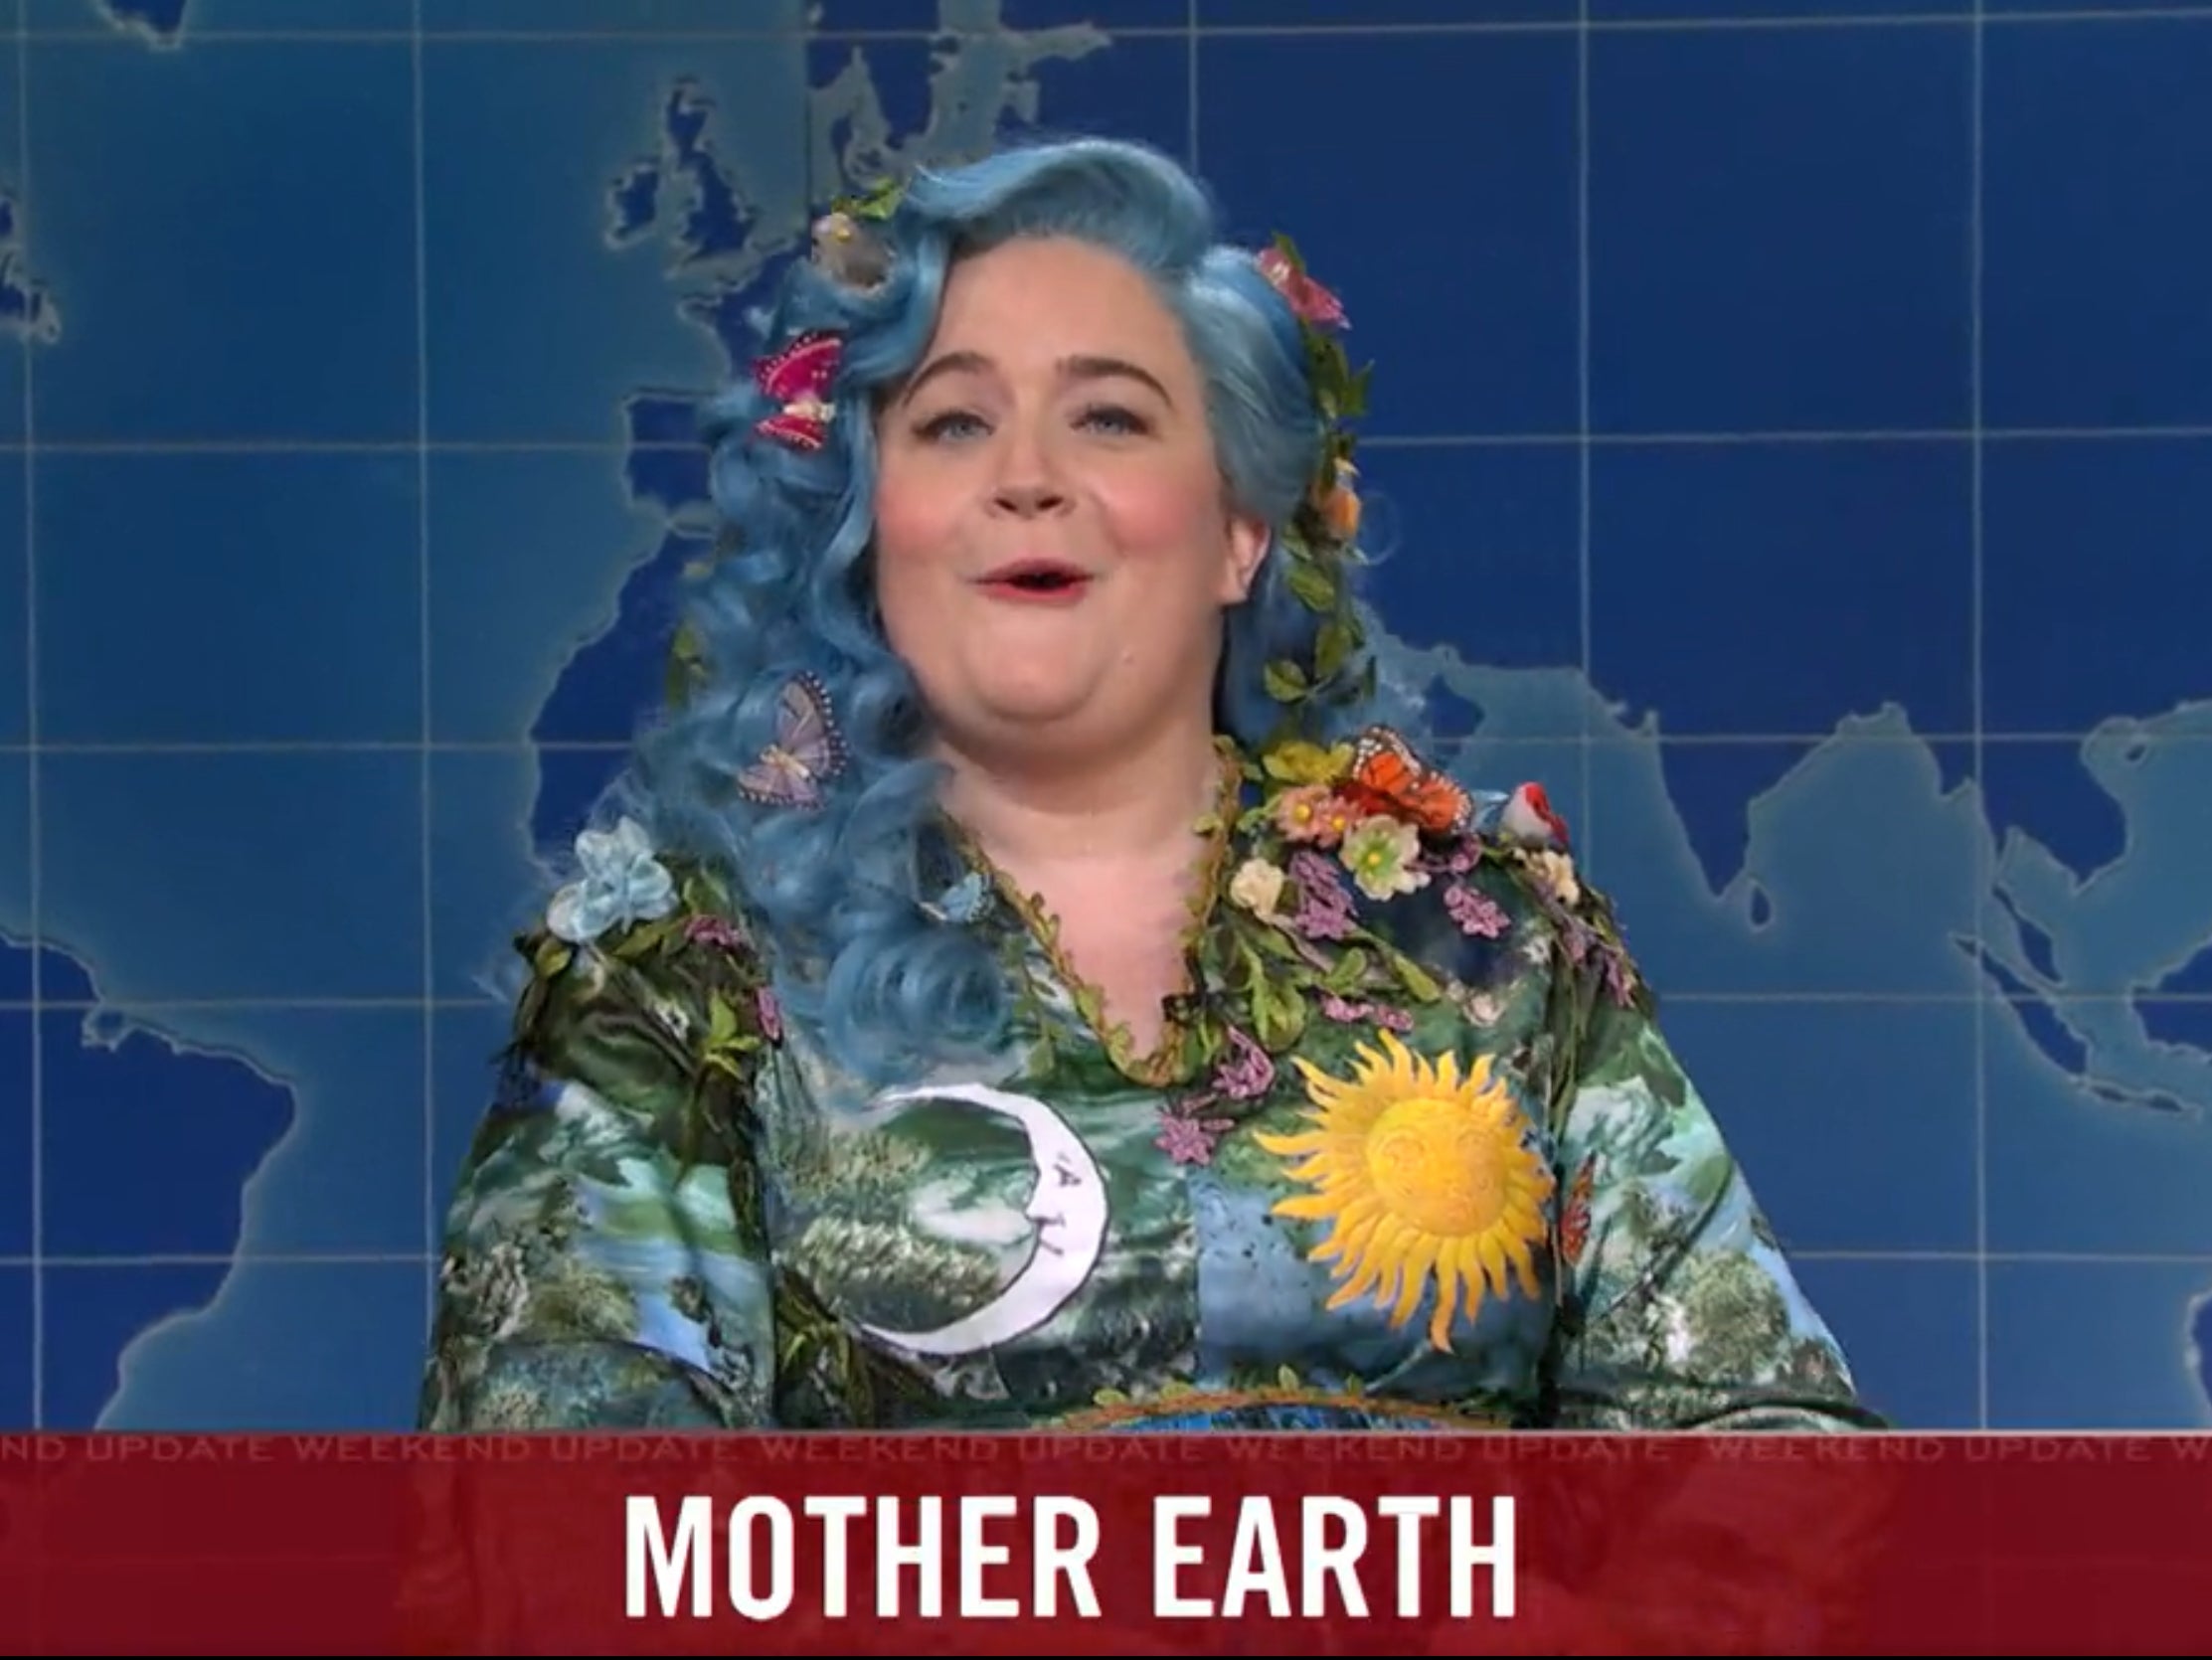 Aidy Bryant as ‘Mother Earth’ on Saturday Night Live, 20 November 2021